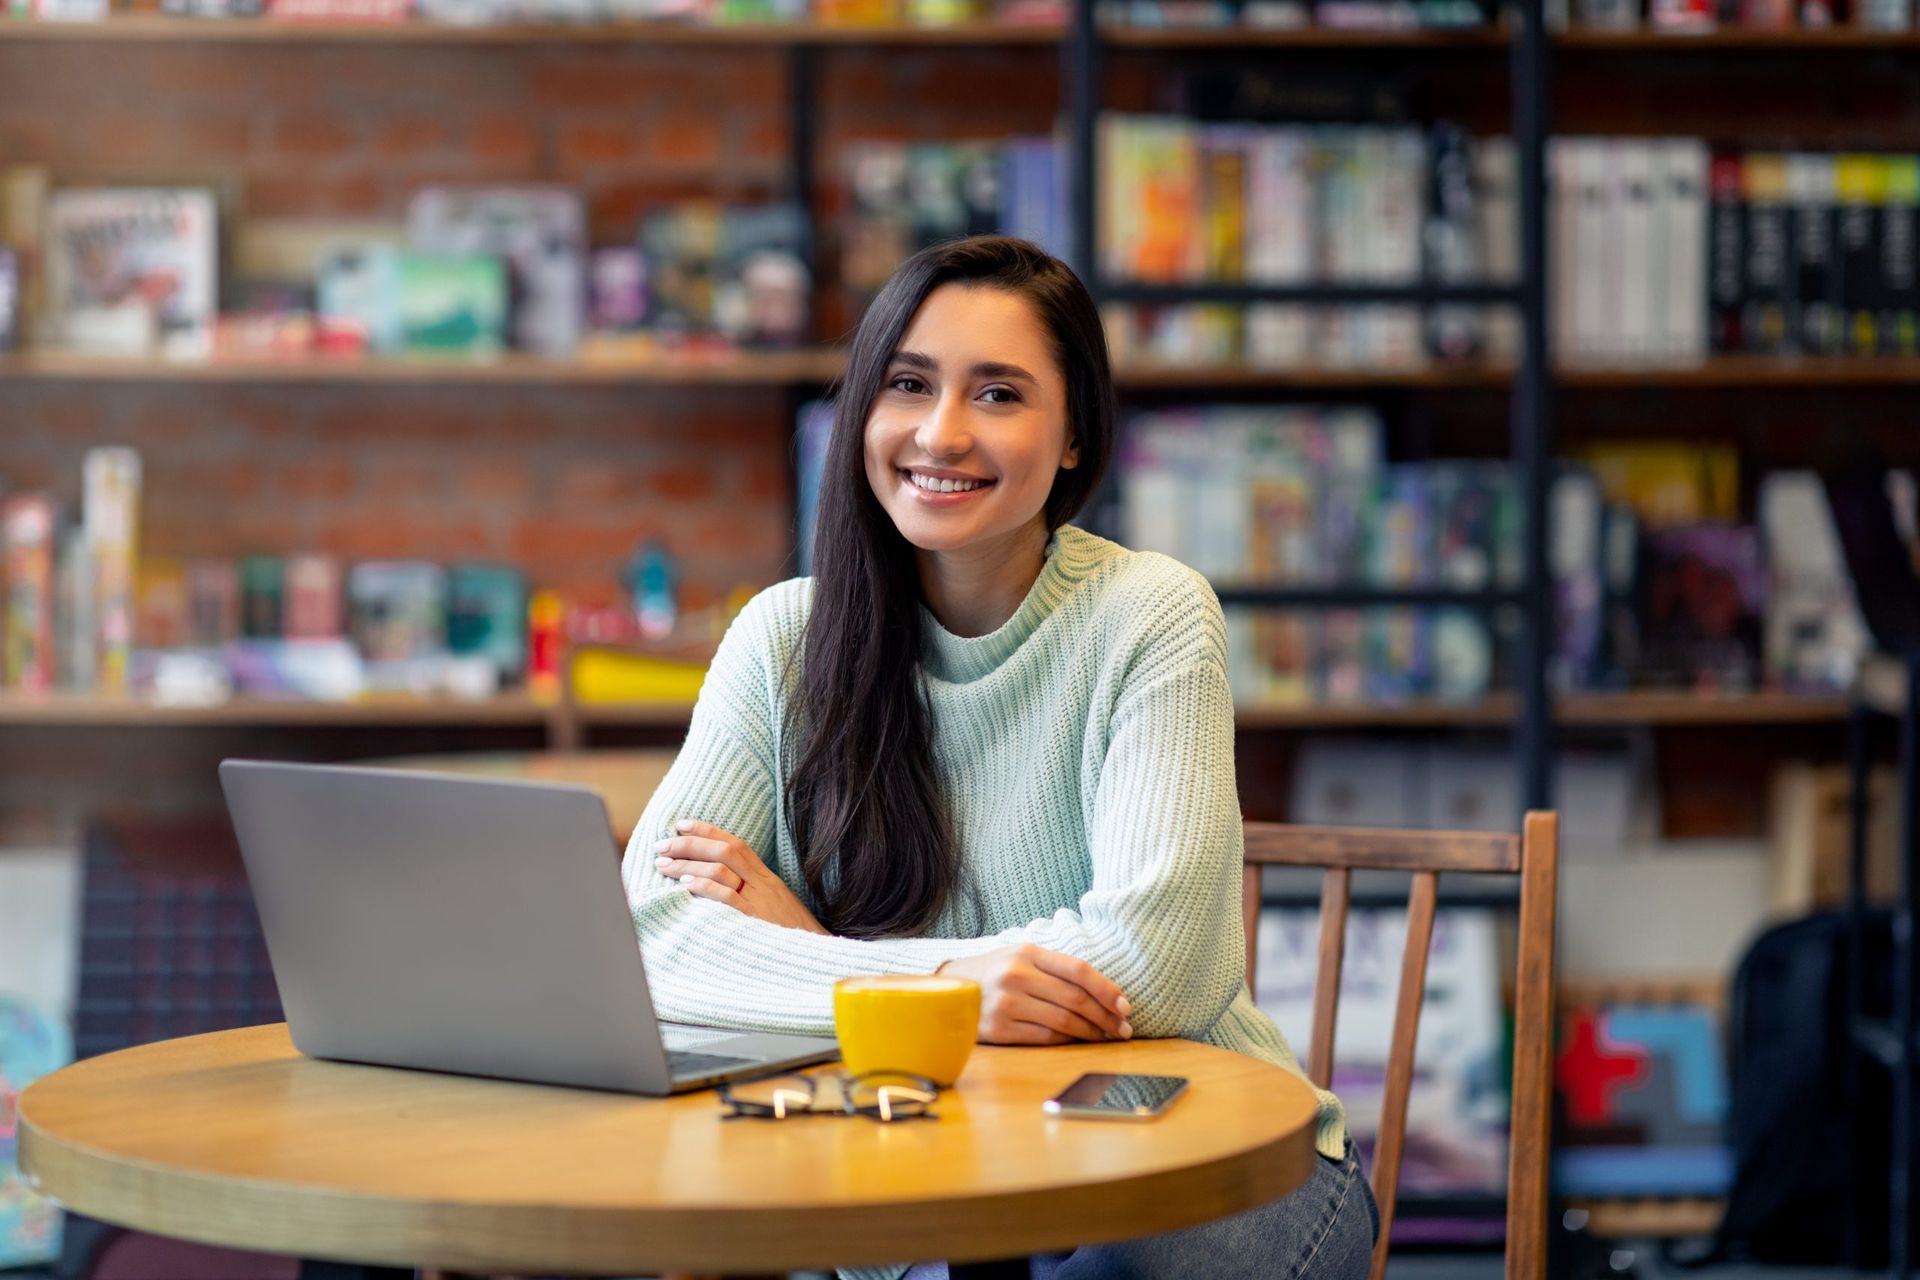 woman in green sweater smiling in a cafe. Laptop on table with glasses, phone and coffee cup. Board games and books in the background on shelves